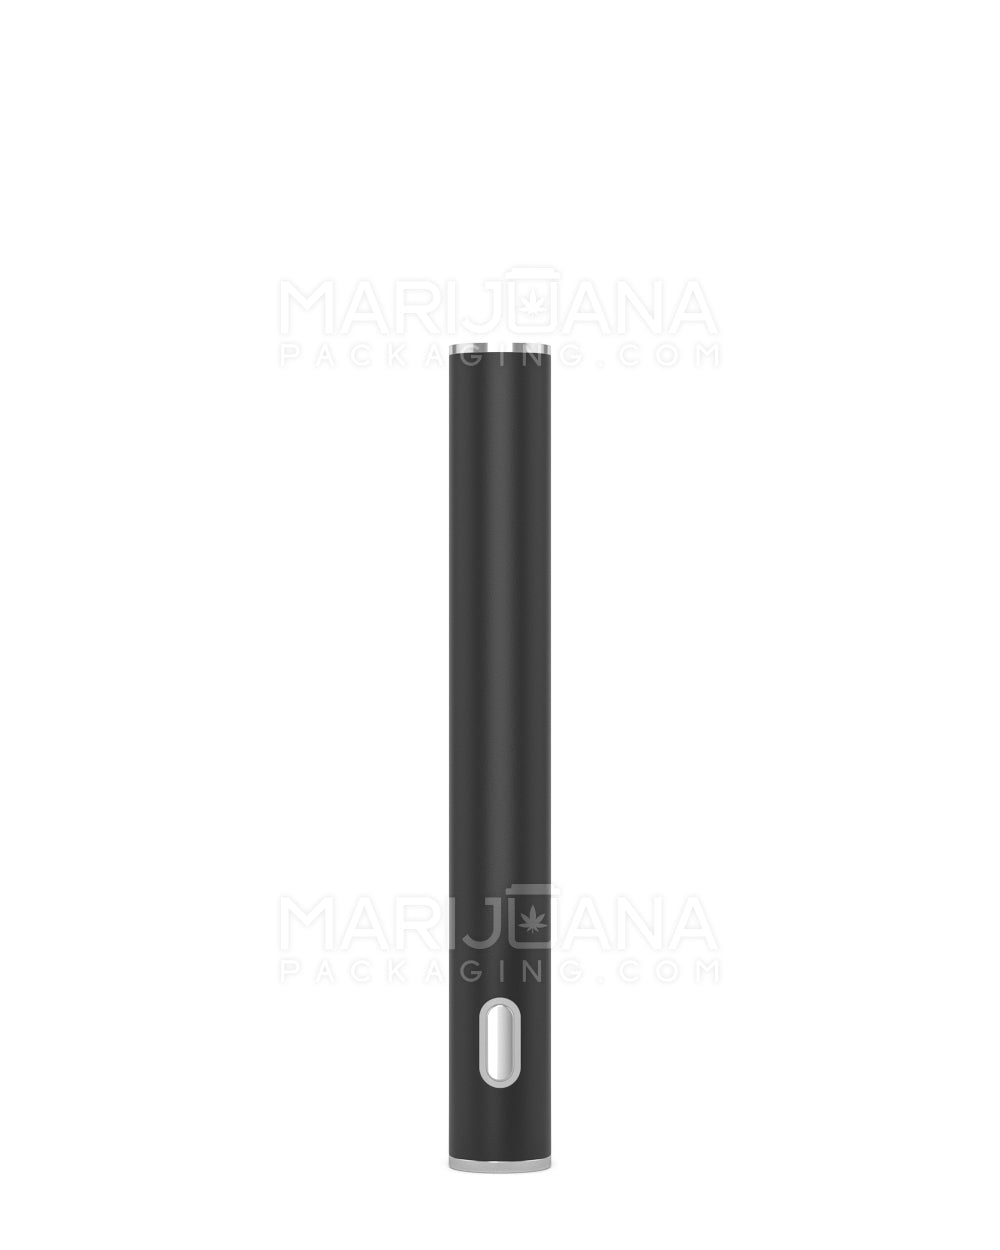 RAE | Instant Draw Activated Vape Battery | 320mAh - Black - 640 Count - 2